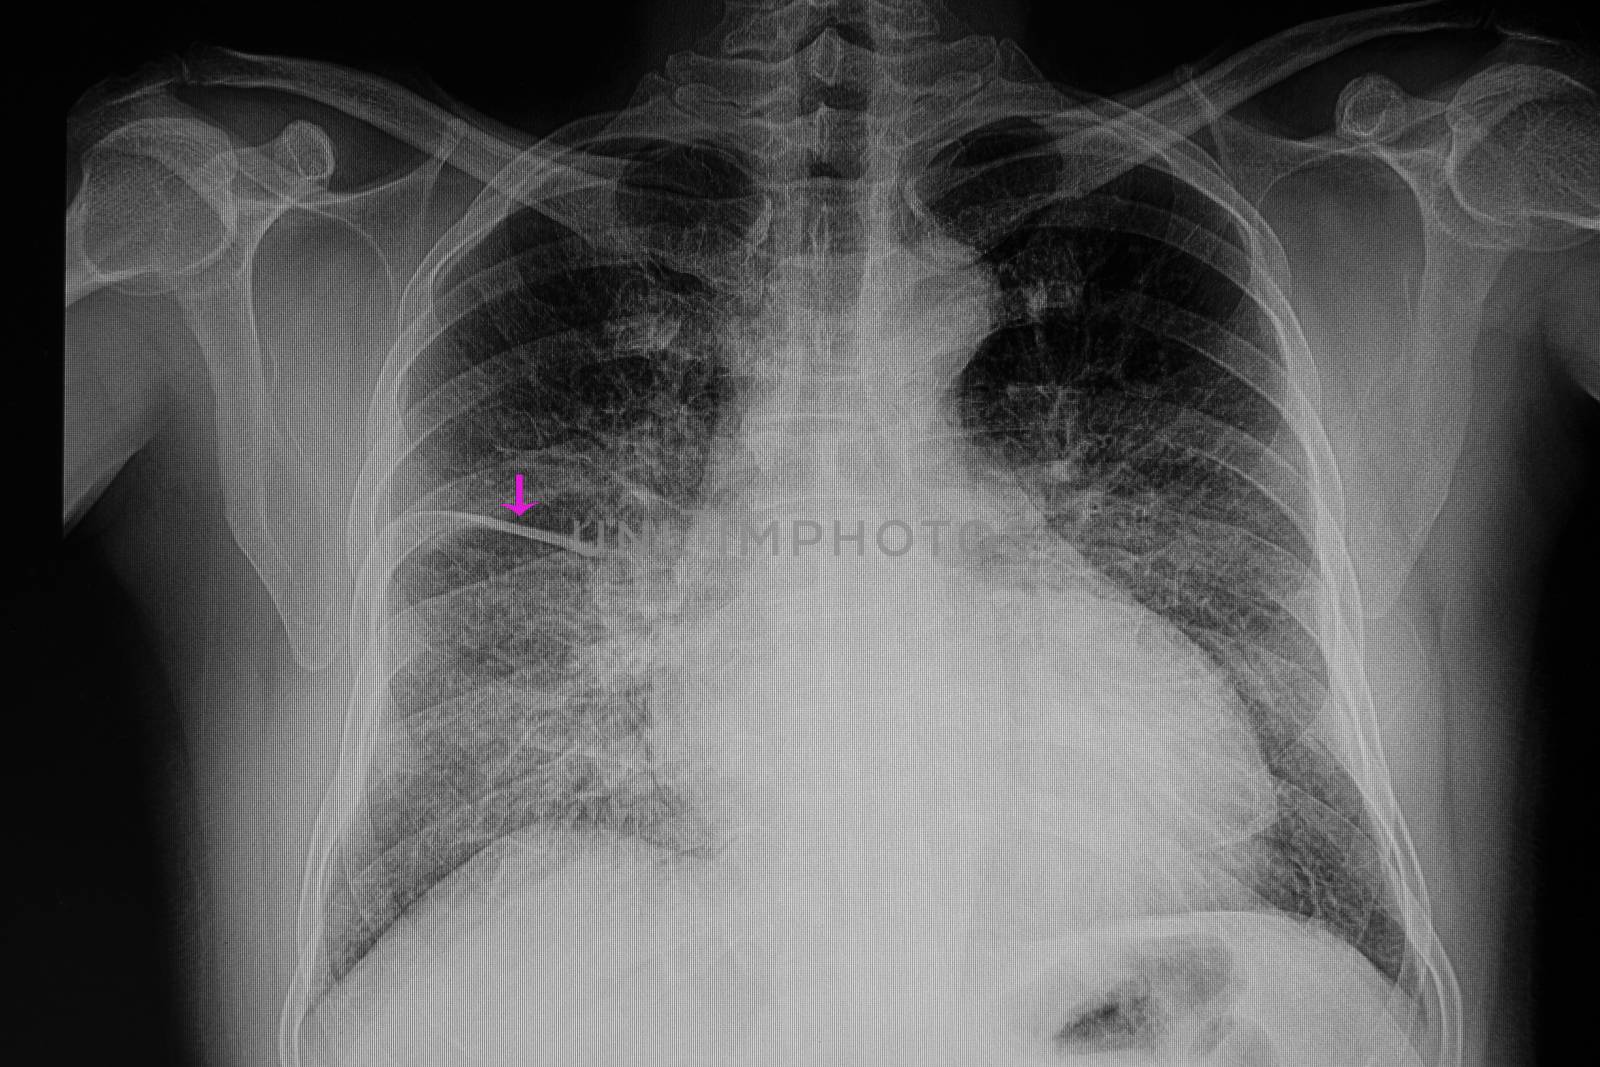 a chest xray film of a patient with cardiomegaly with congestive heart failure and pulmonary edema with fliuid in right lung fissure (arrow)